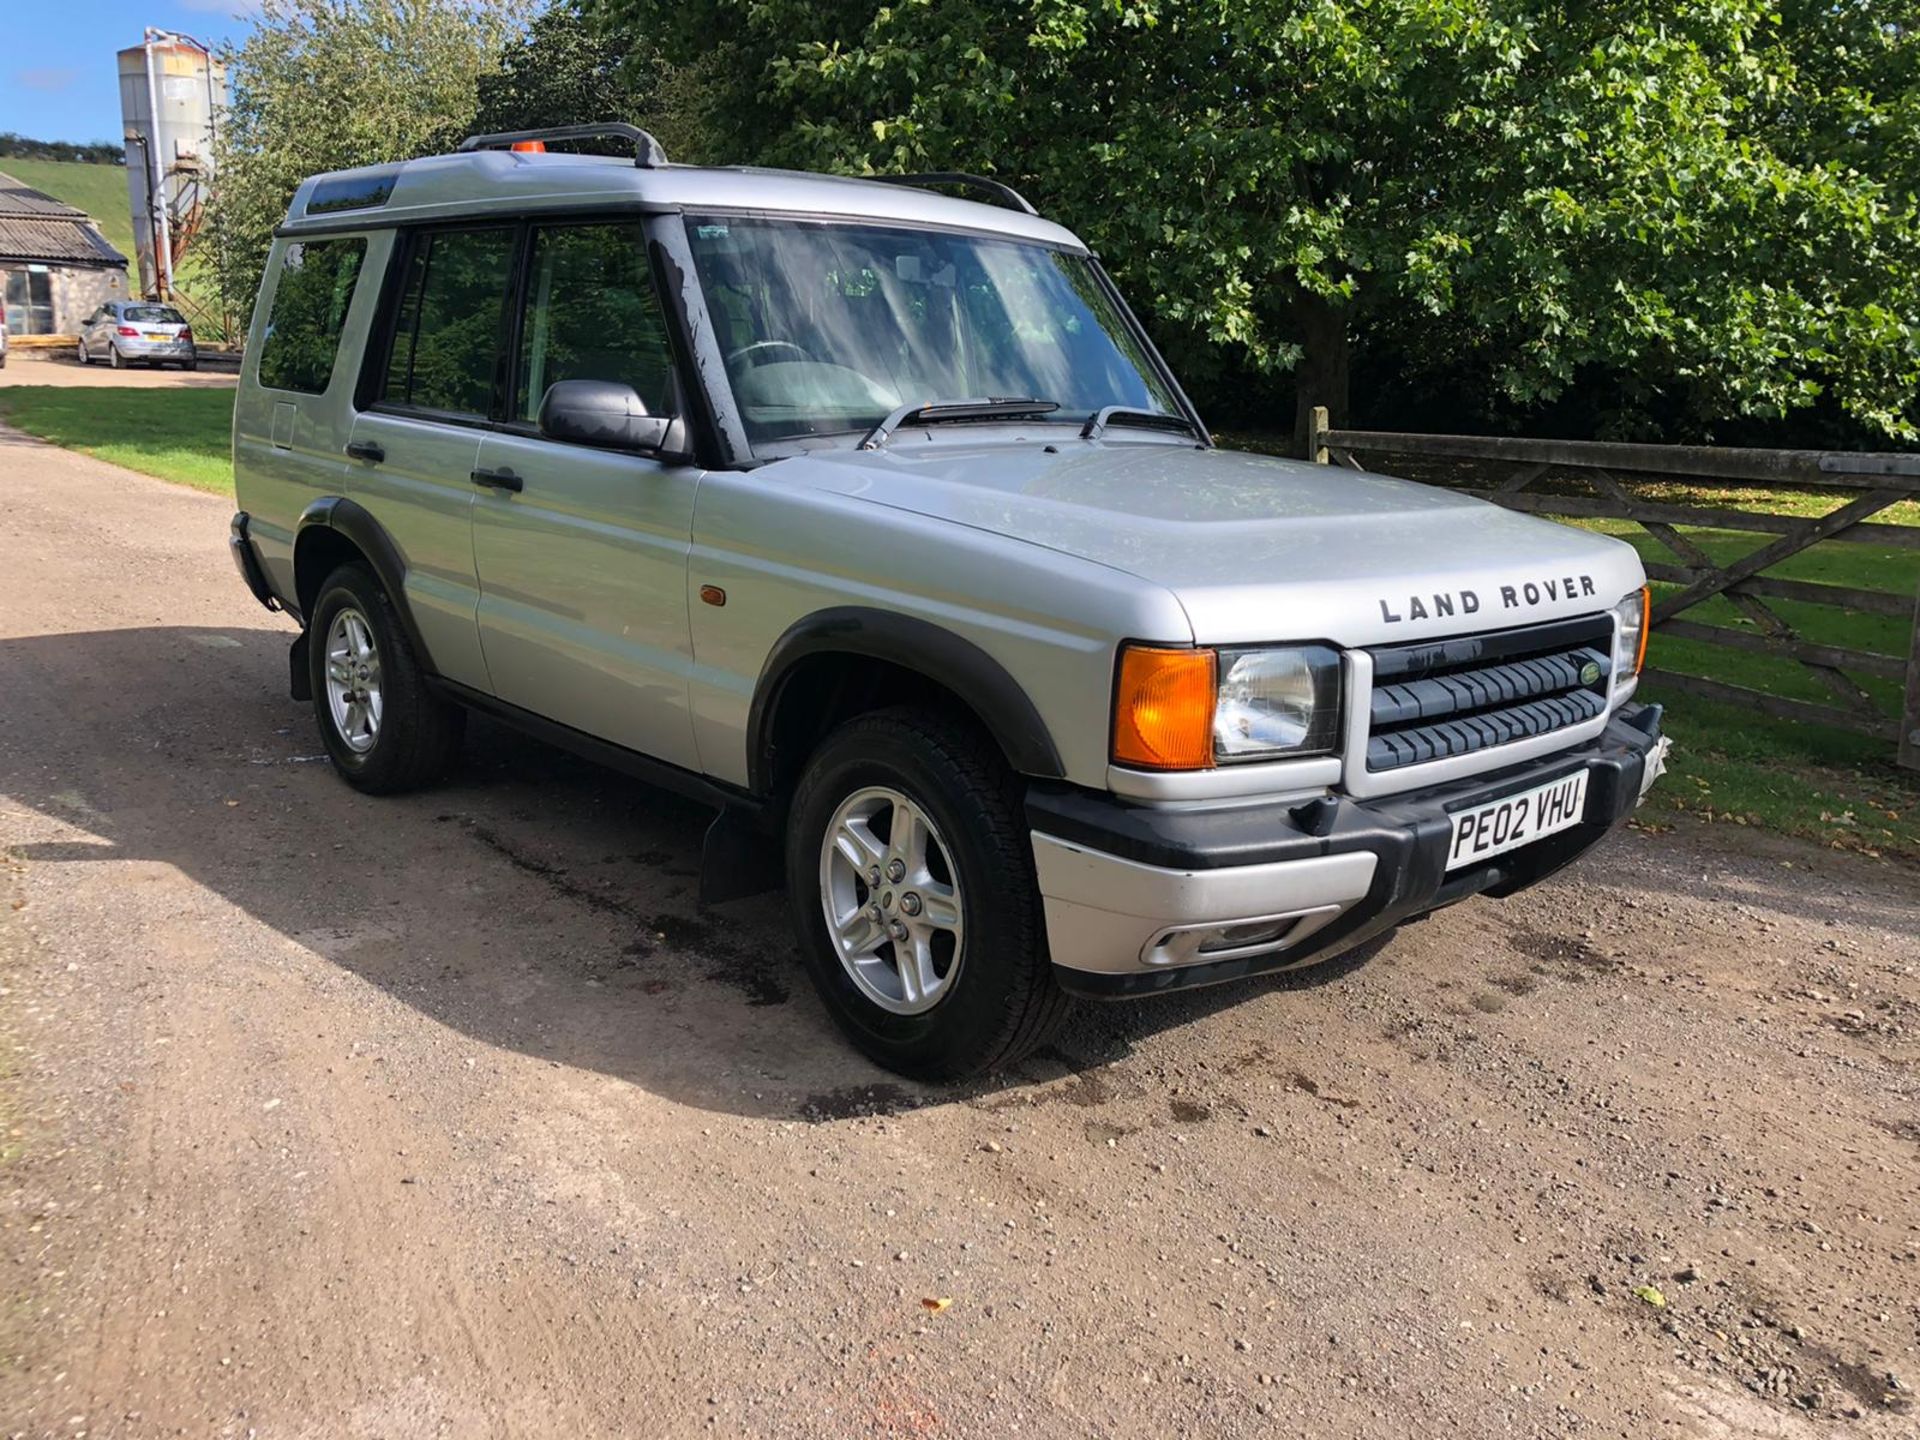 2002 LAND ROVER DISCOVERY TD5 GS SILVER ESTATE, 2.5 DIESEL ENGINE, 201,163 MILES *NO VAT*